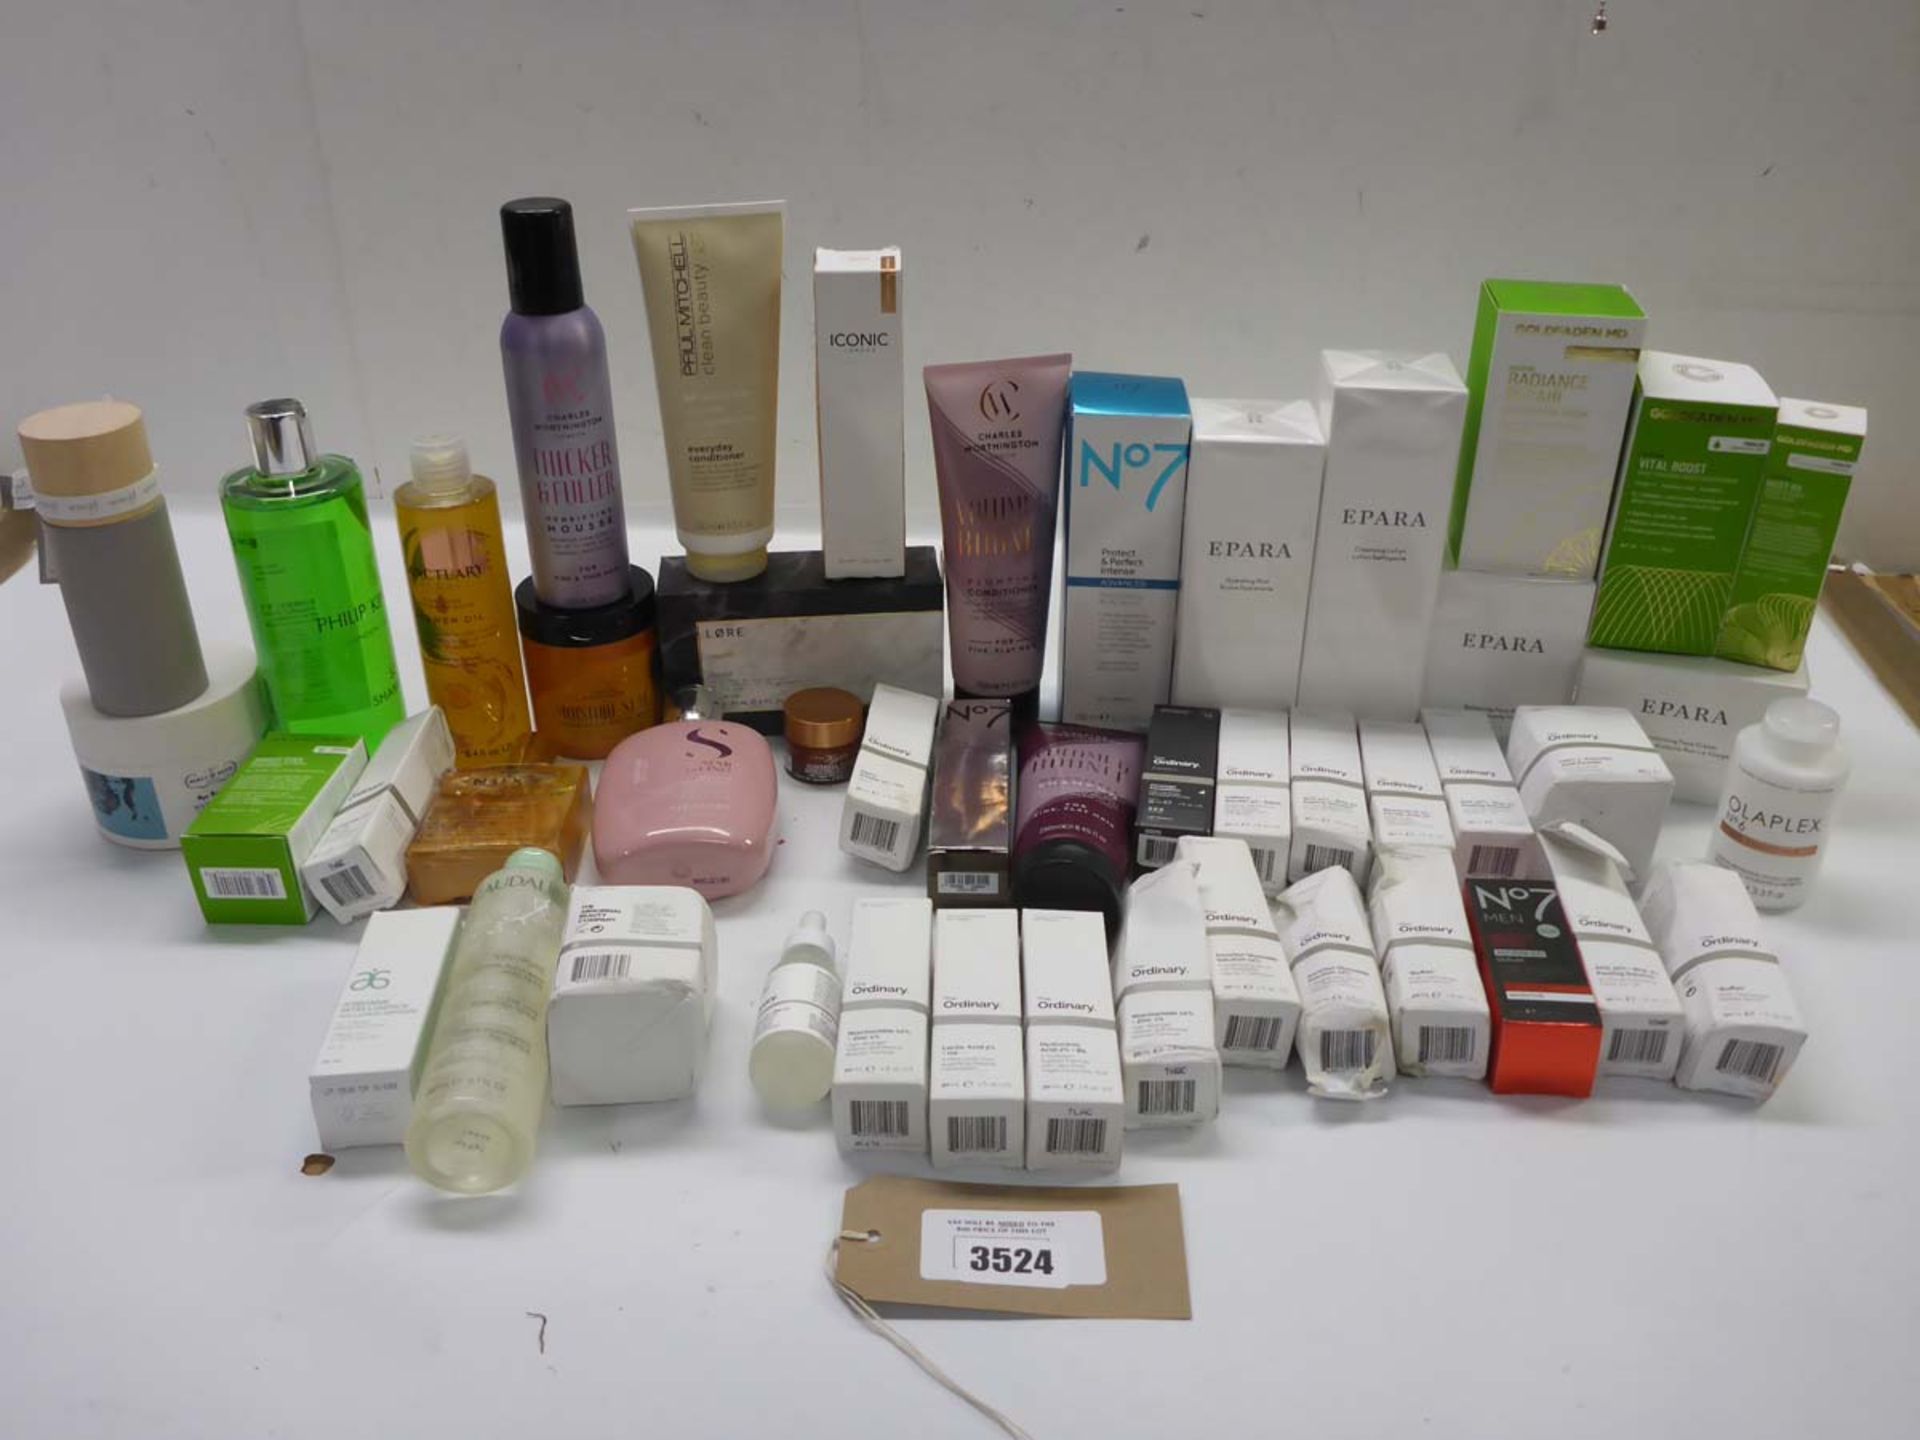 Selection of branded toiletries including Epara, Goldfaden, Sanctuary, Iconic, The Ordinary, Lore